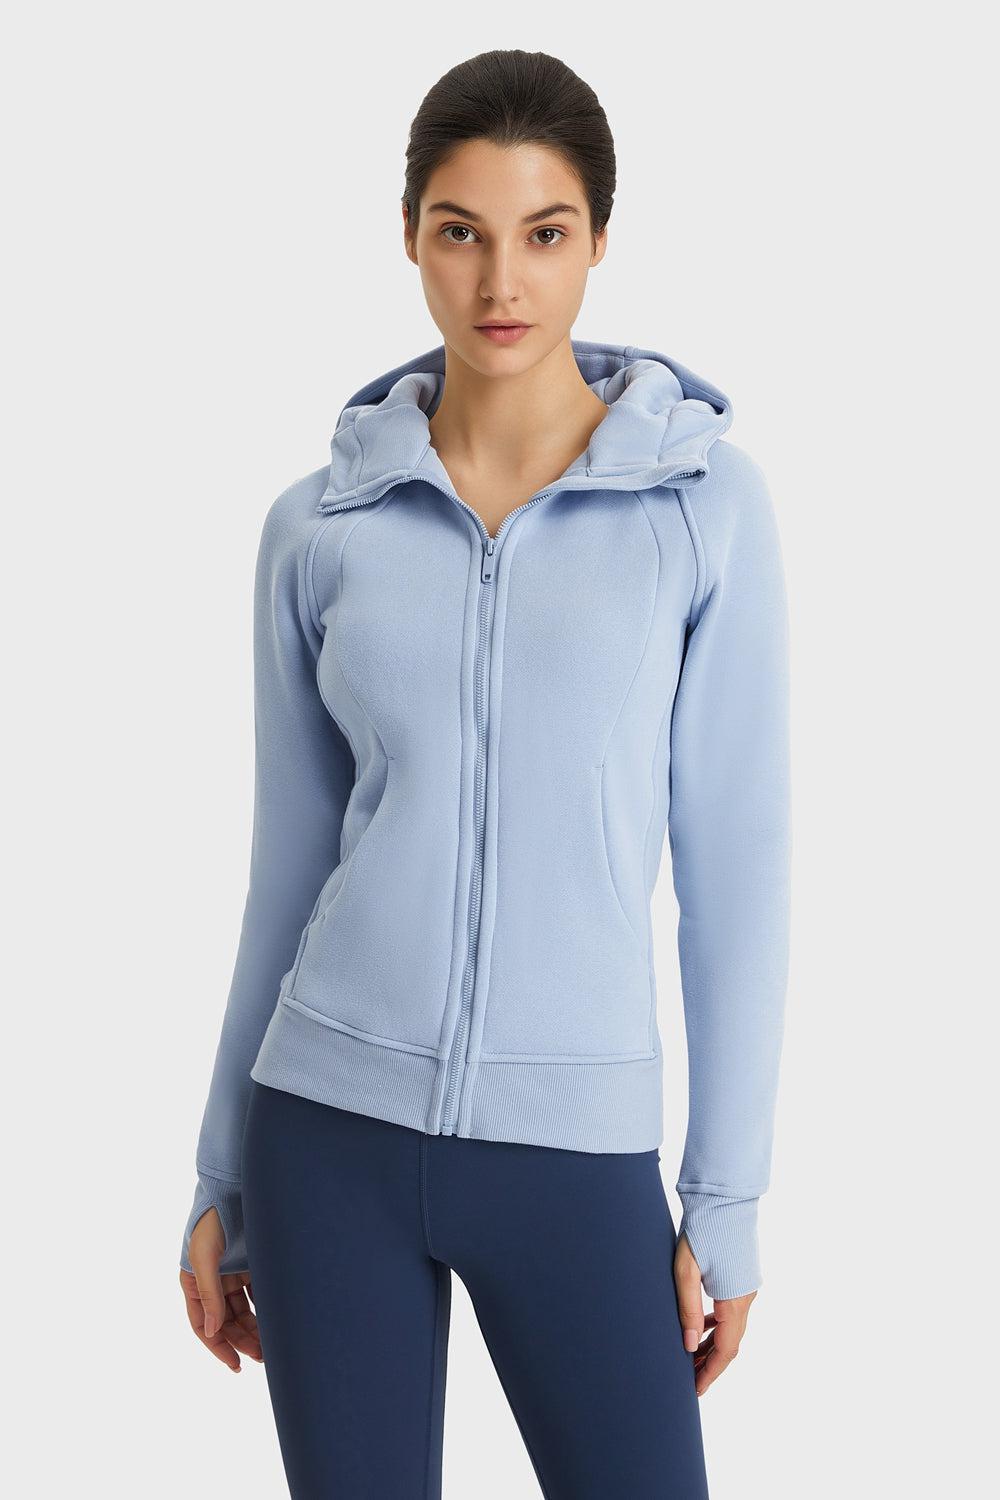 Zip Up Seam Detail Hooded Sports Jacket-TOPS / DRESSES-[Adult]-[Female]-Blue-4-Blue Zone Planet